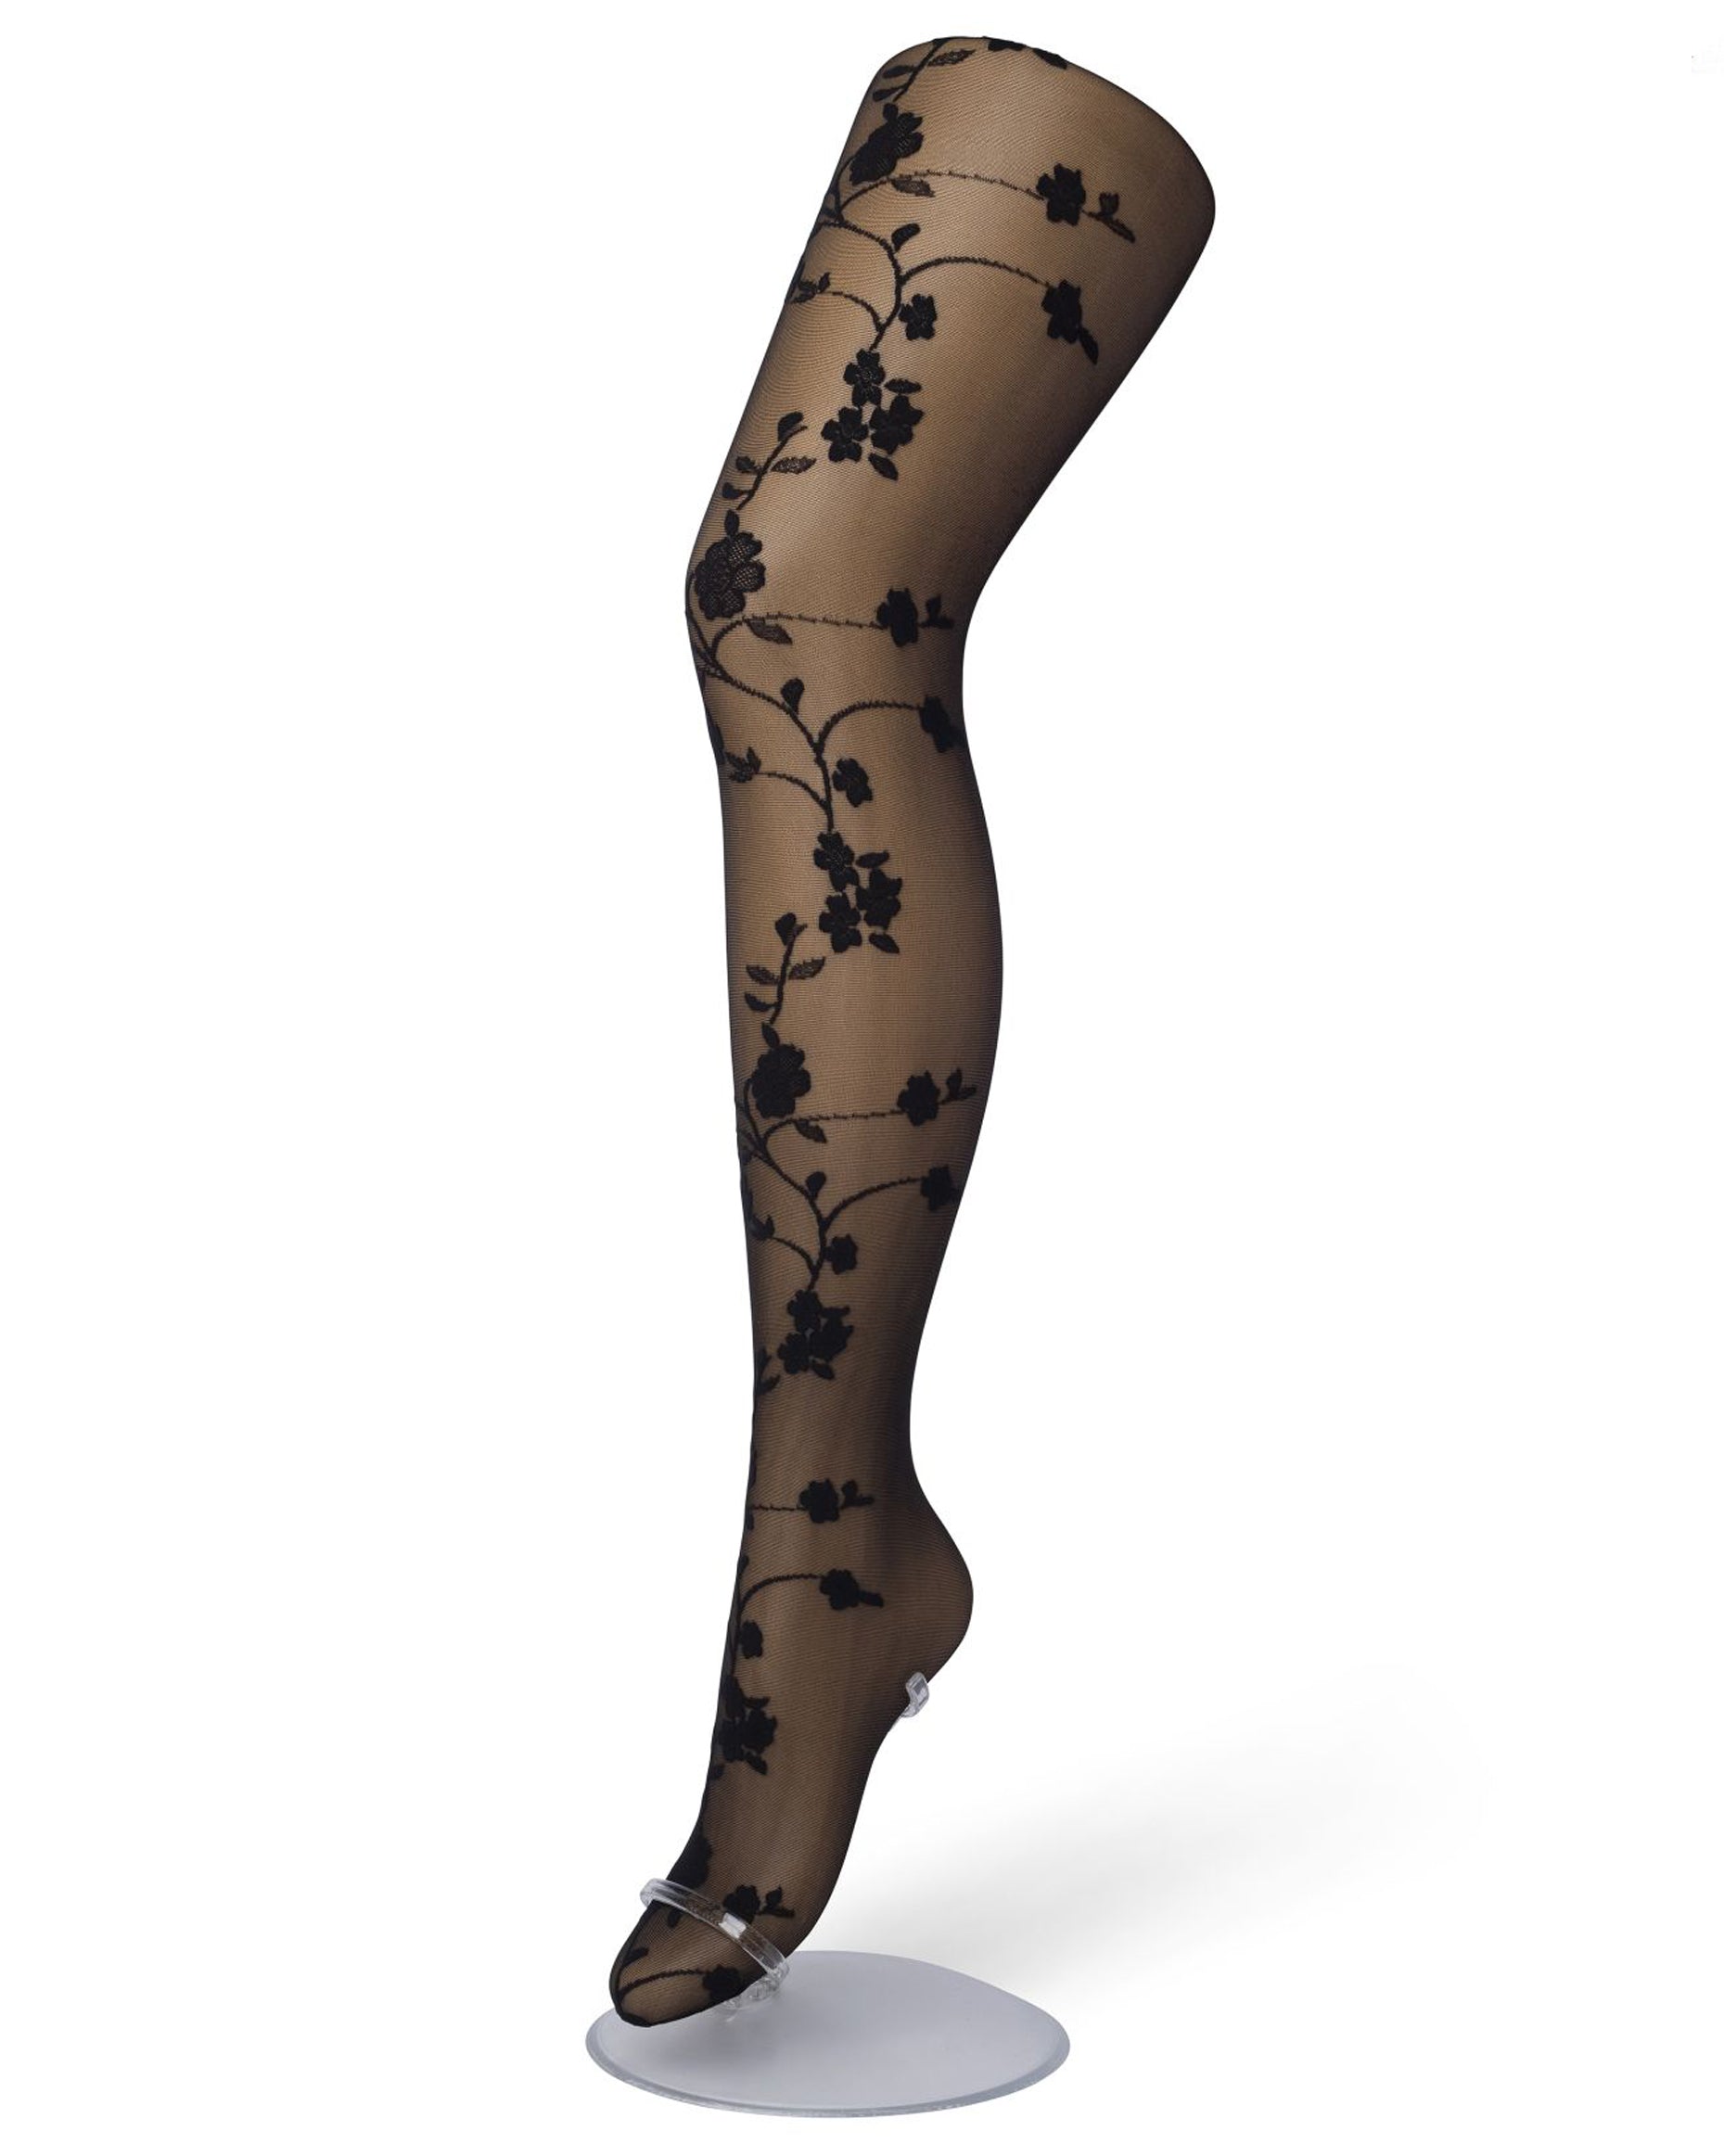 Bonnie Doon Bloom Tights - Sheer black fashion tights with a woven floral vine pattern on the front and plain on the back, reinforced boxer top brief and gusset.